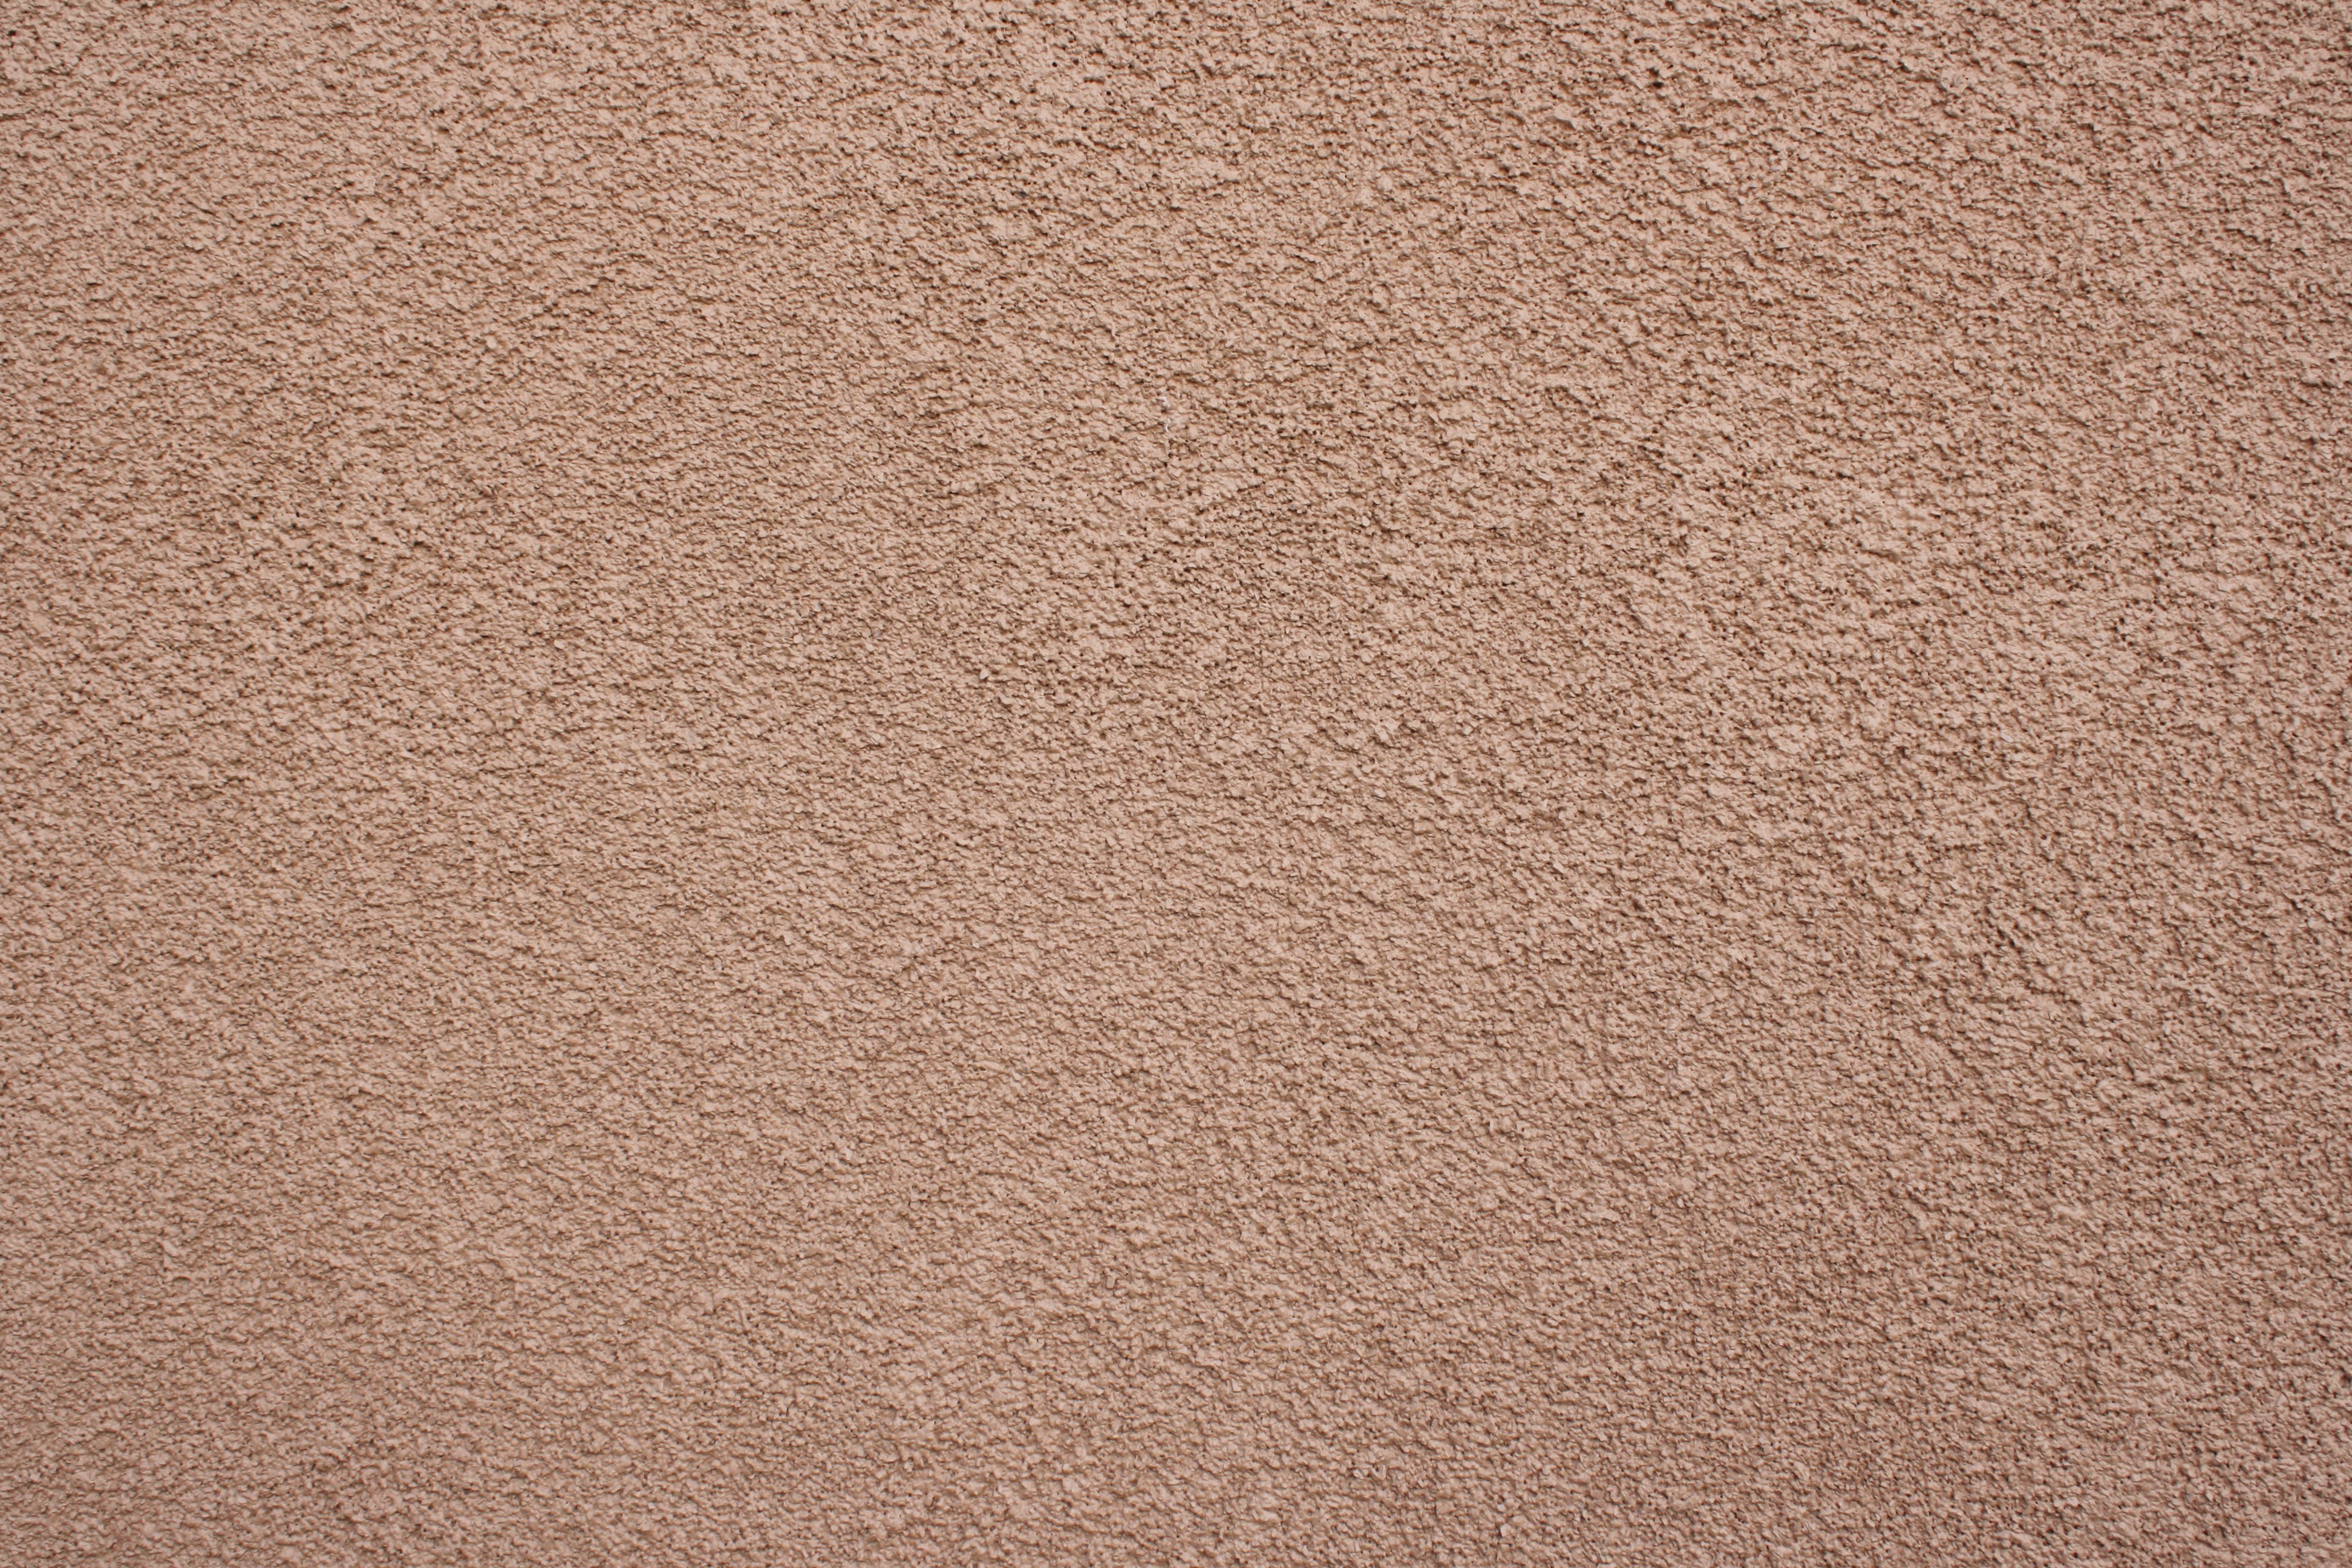 tan stucco wall texture free high resolution photo dimensions